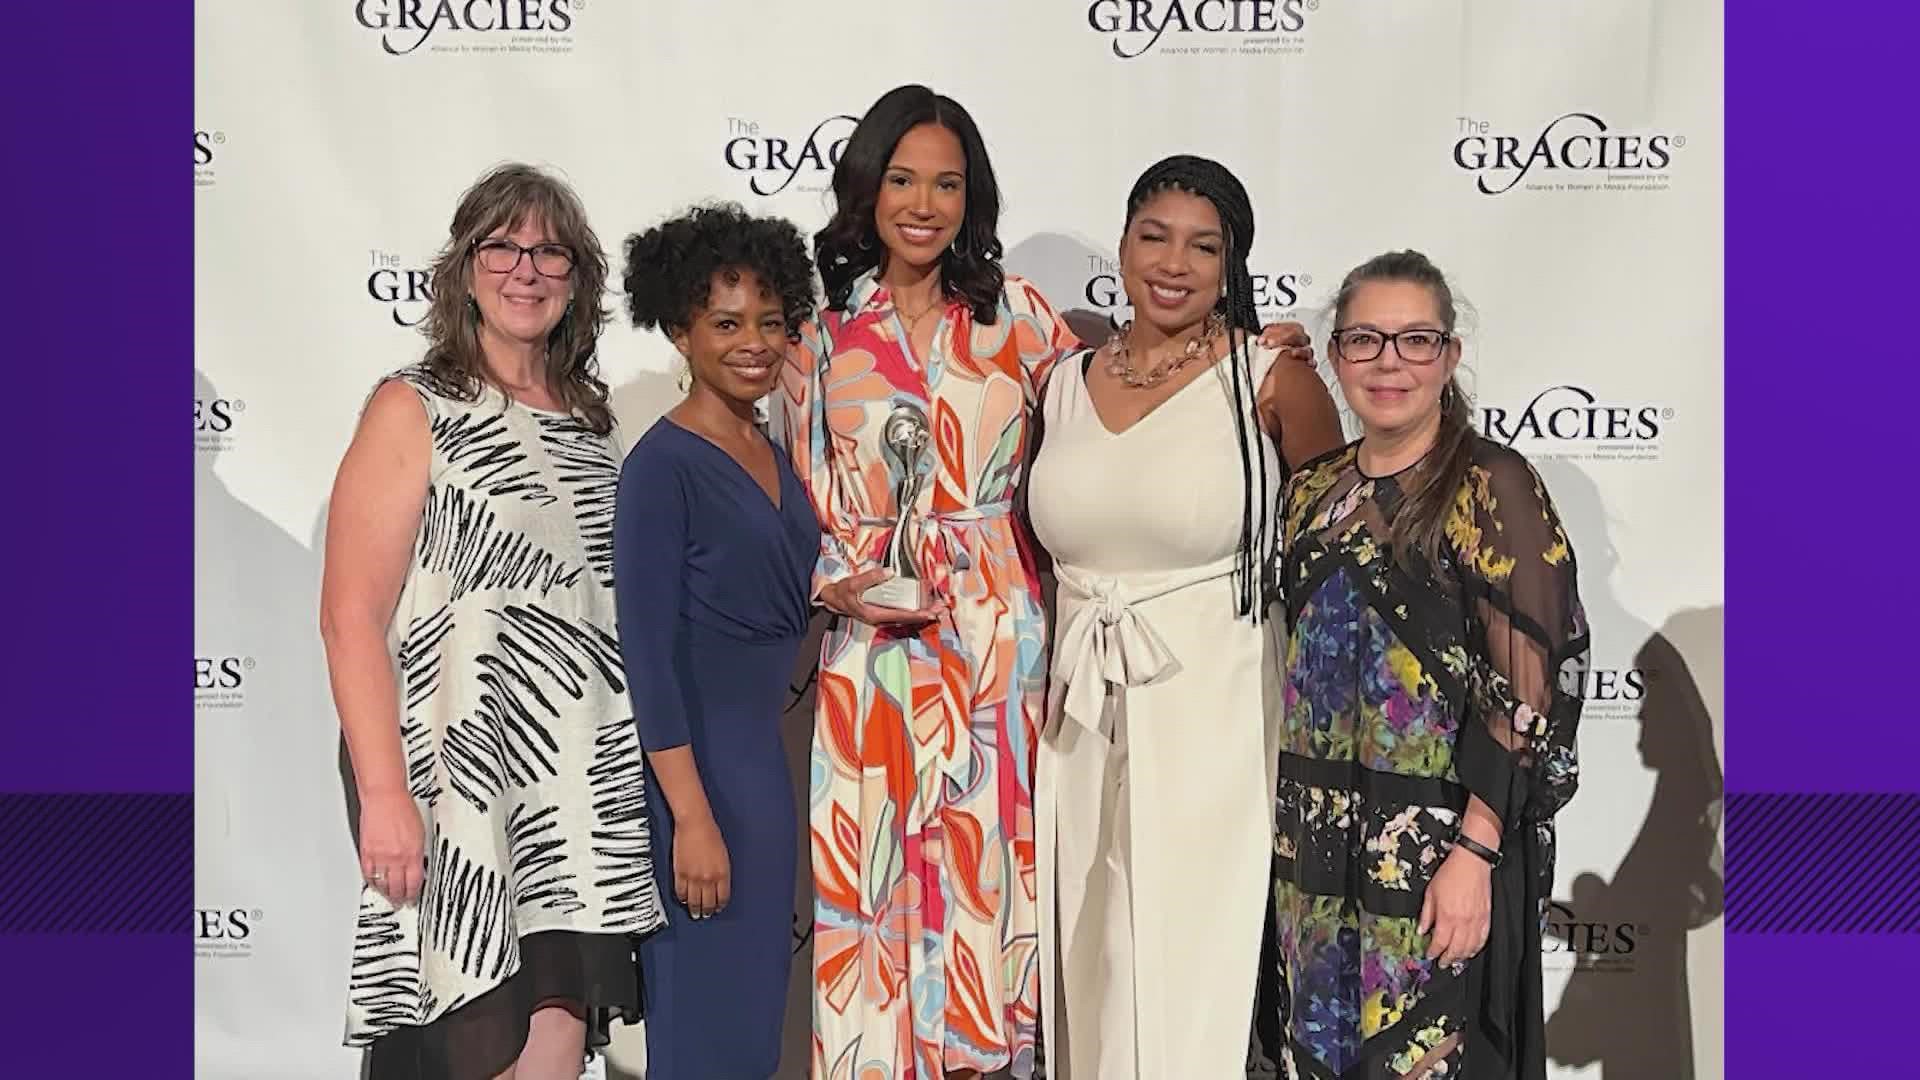 The special "Juneteenth: 1865-2021" was honored with a prestigious Gracie award from the Alliance for Women in Media Foundation.